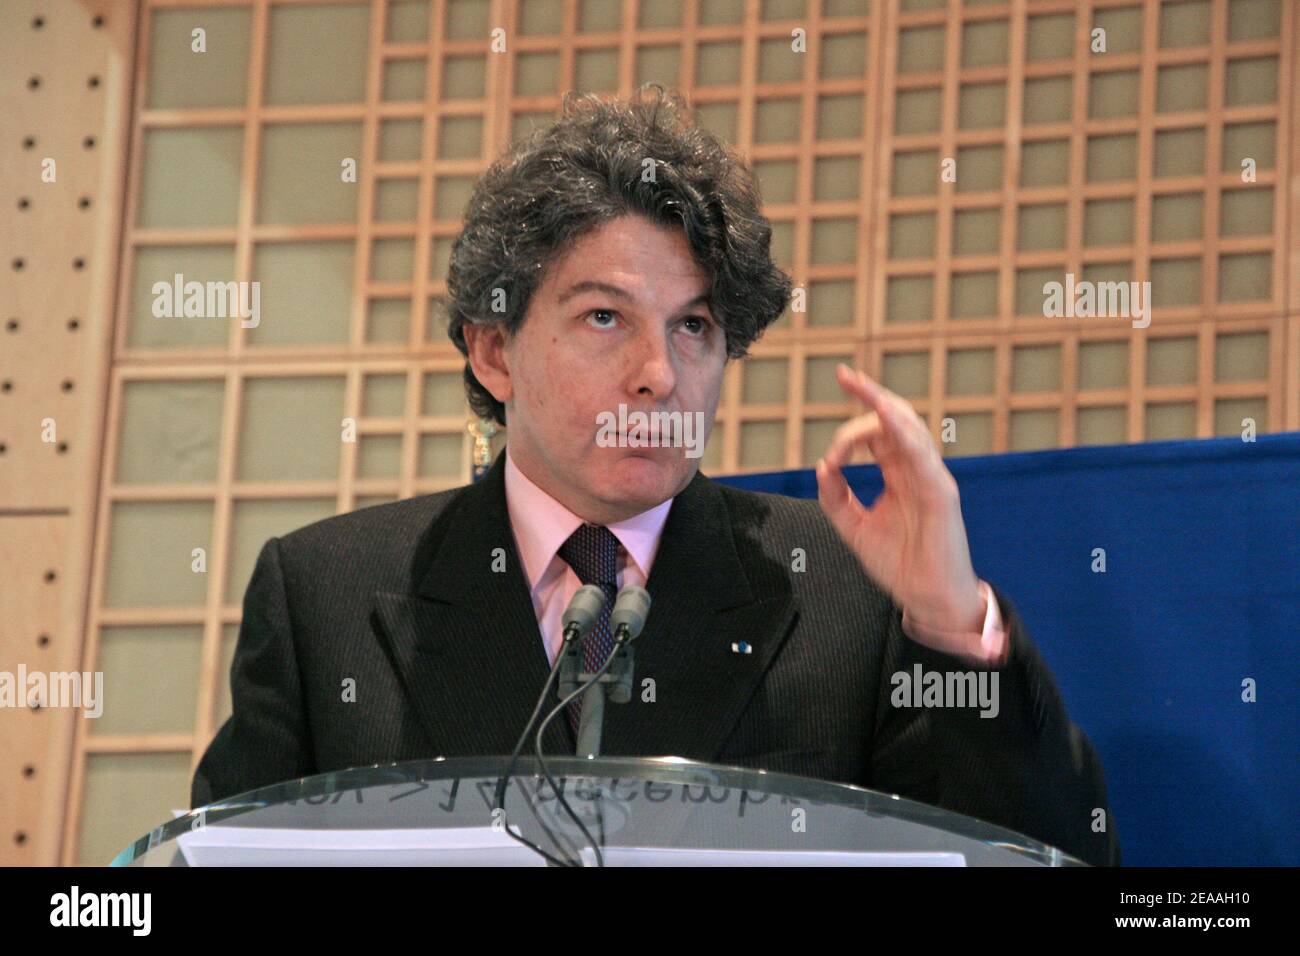 French finances minister Thierry Breton addresses the press after BNP Paribas Michel Pebereau, delivered a speech, during a press conference on France public debt at finances minister in Paris, on december 14, 2005. Photo by Denis Guignebourg/ABACAPRESS.COM Stock Photo